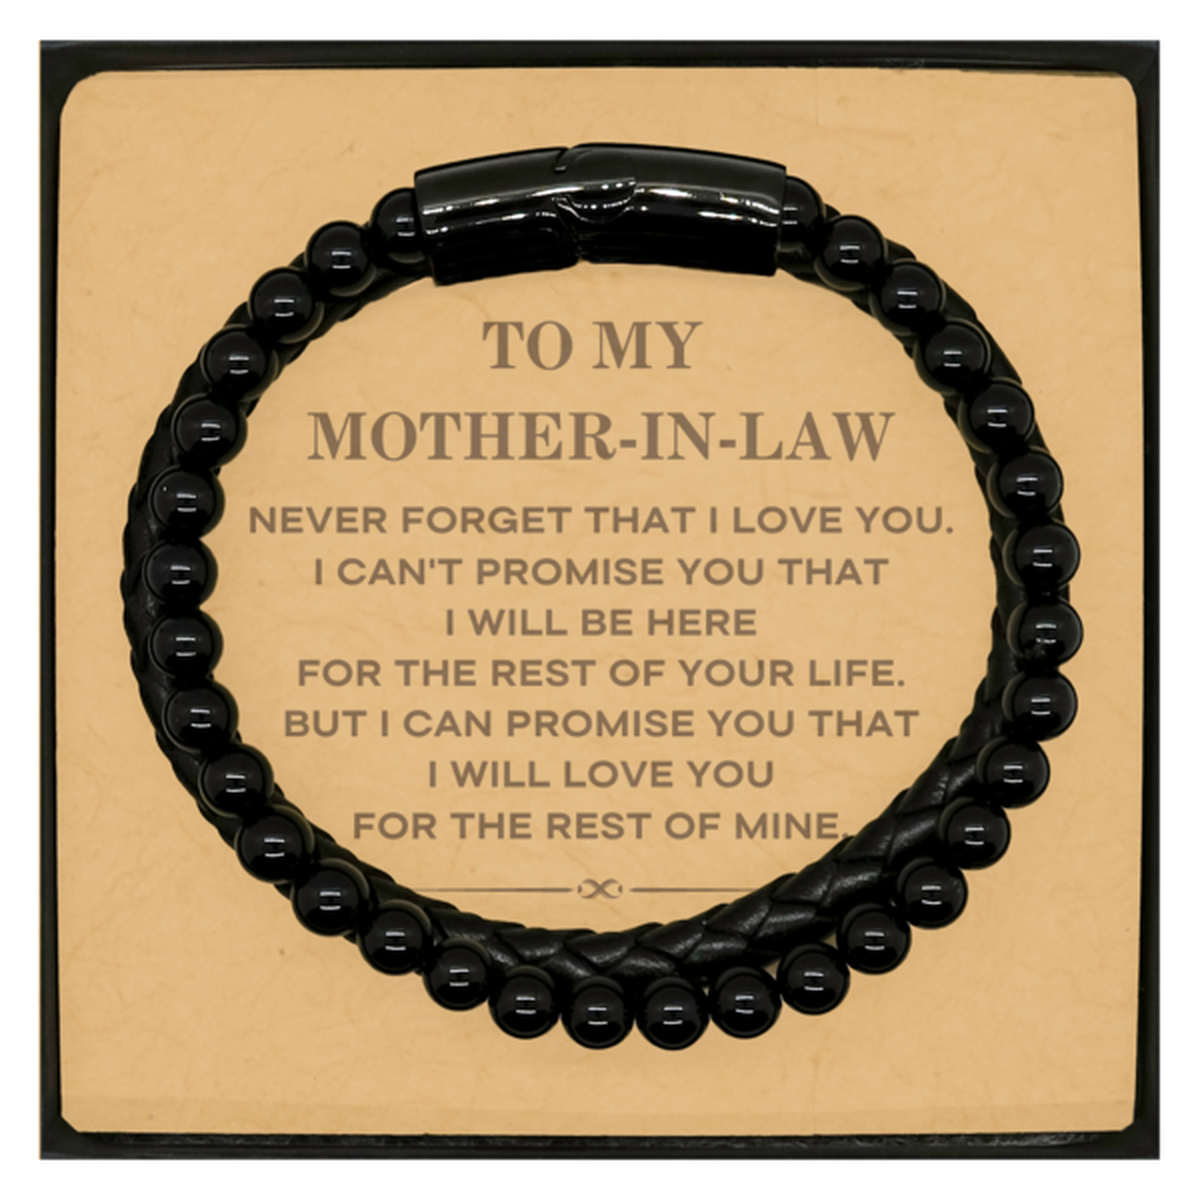 To My Mother-In-Law Gifts, I will love you for the rest of mine, Love Mother-In-Law Bracelet, Birthday Christmas Unique Stone Leather Bracelets For Mother-In-Law